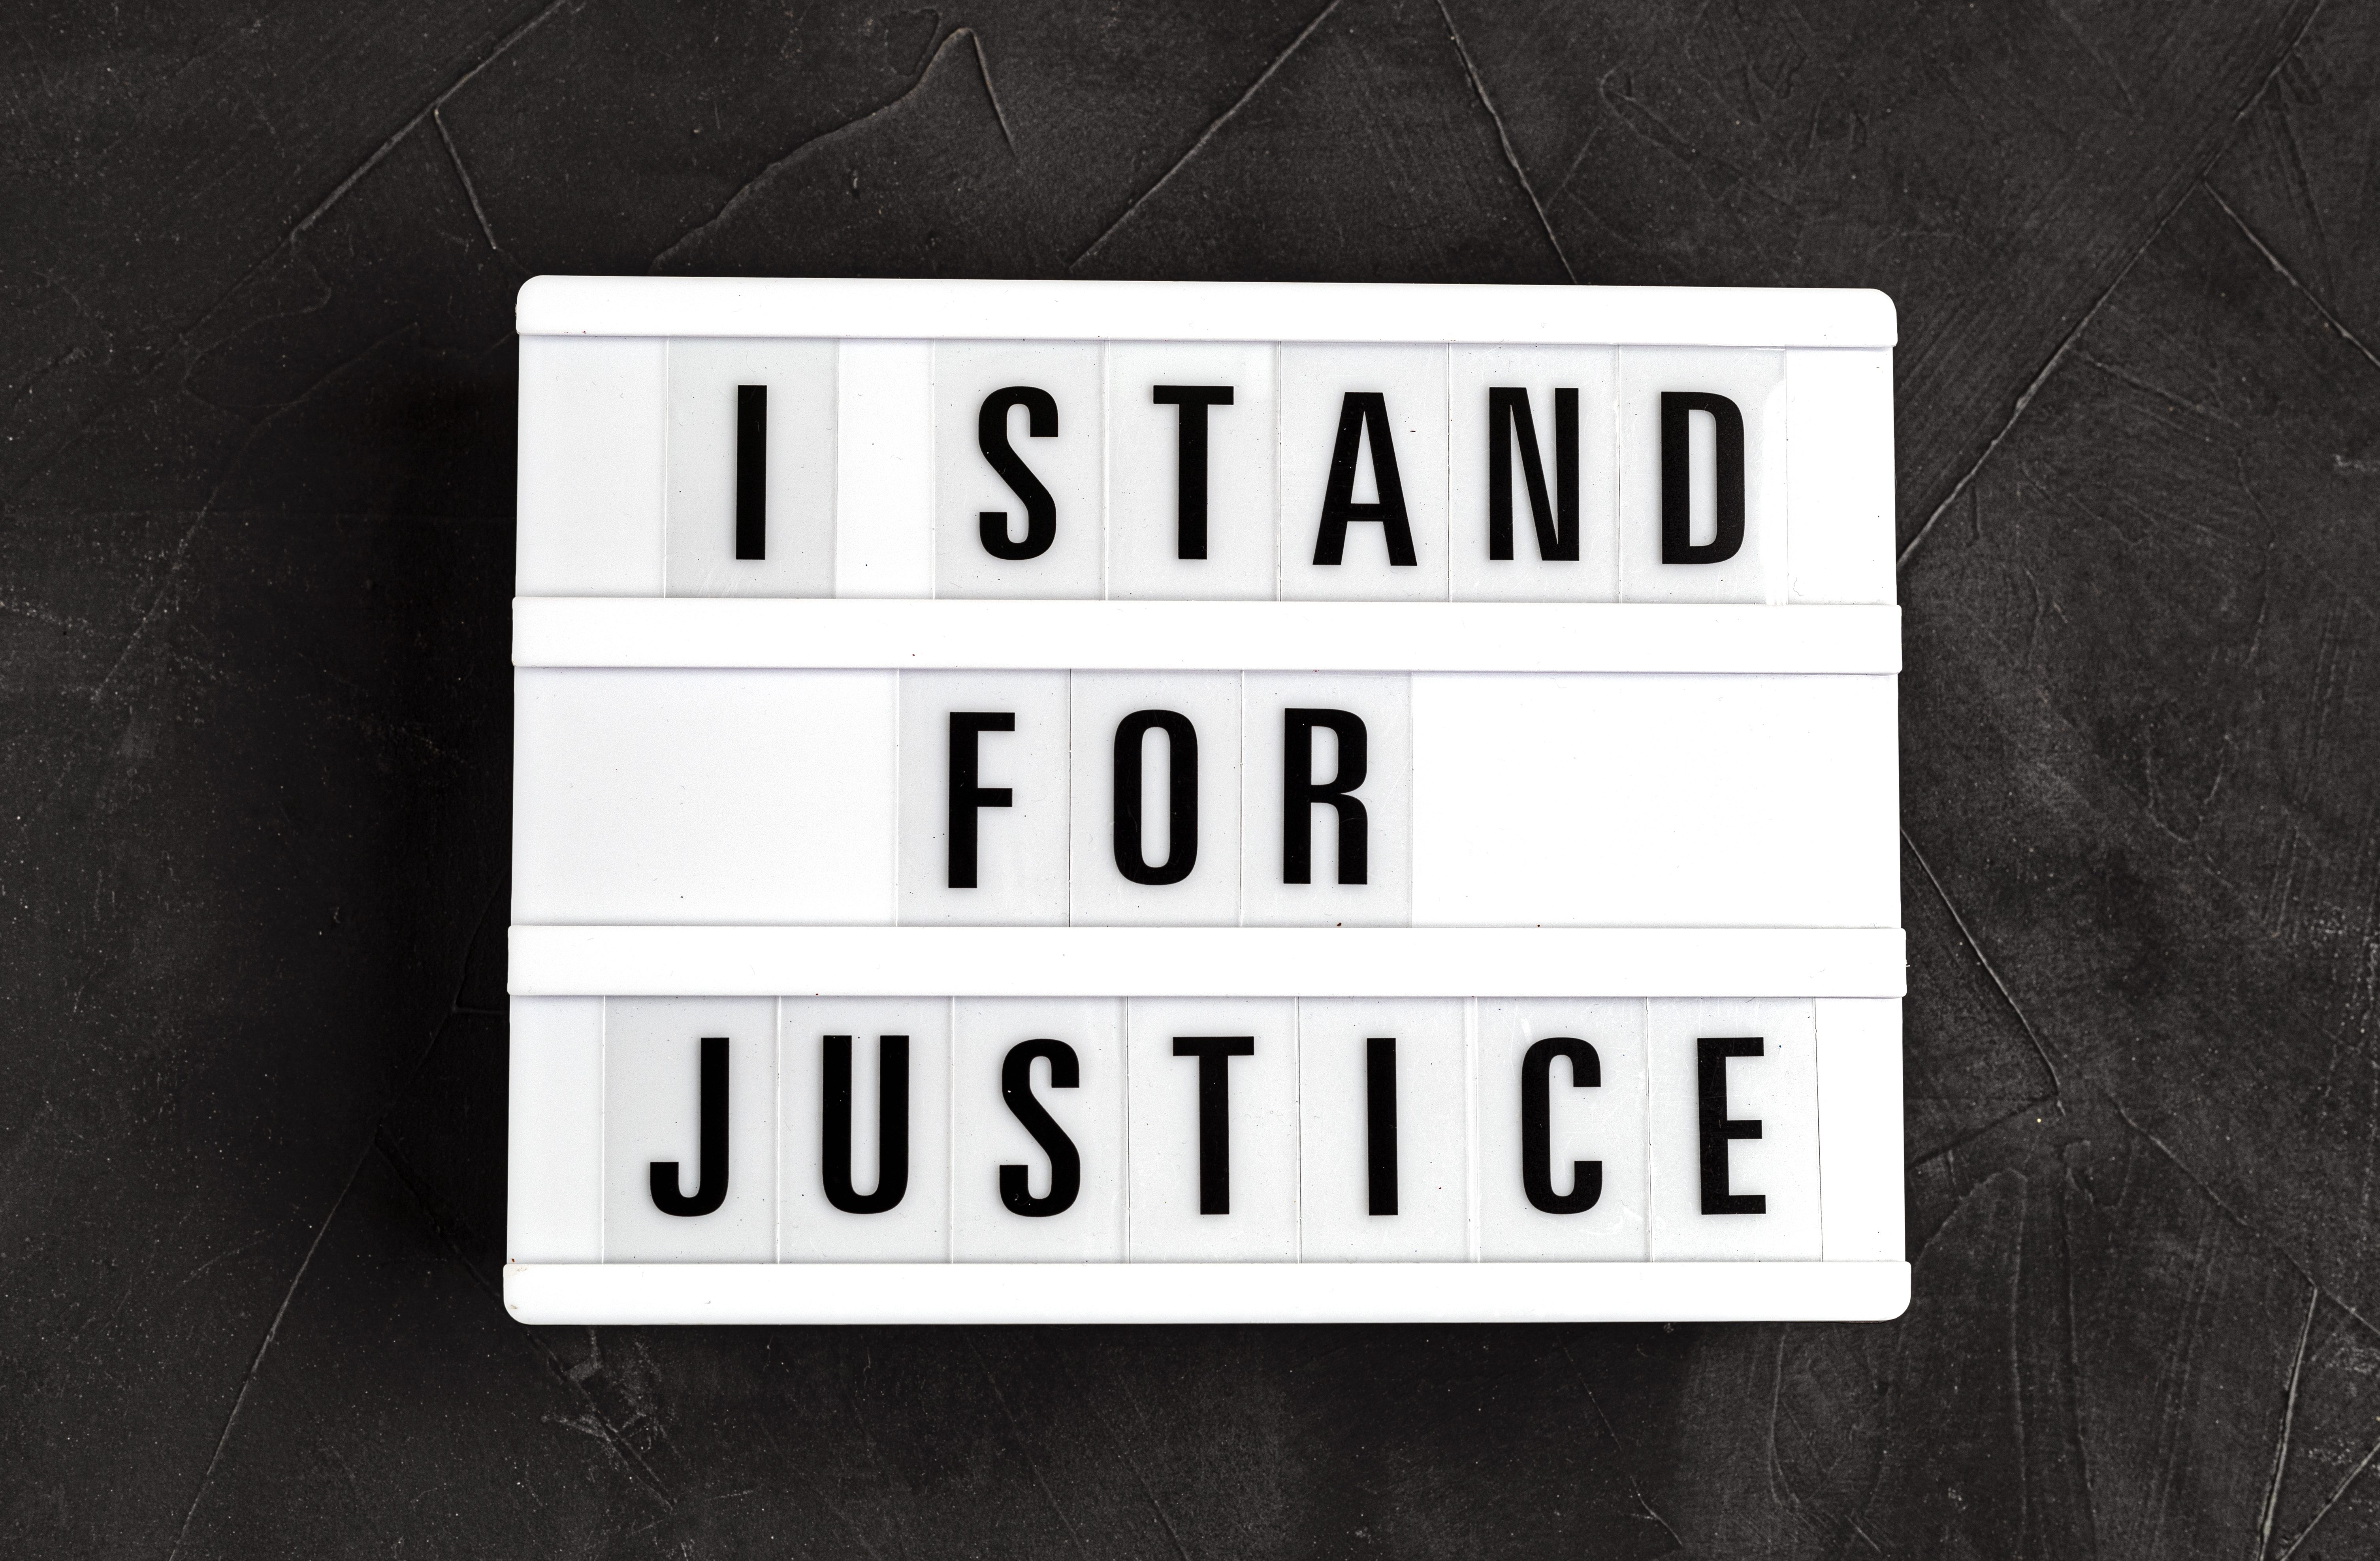 I stand for justice text on light box on dark background